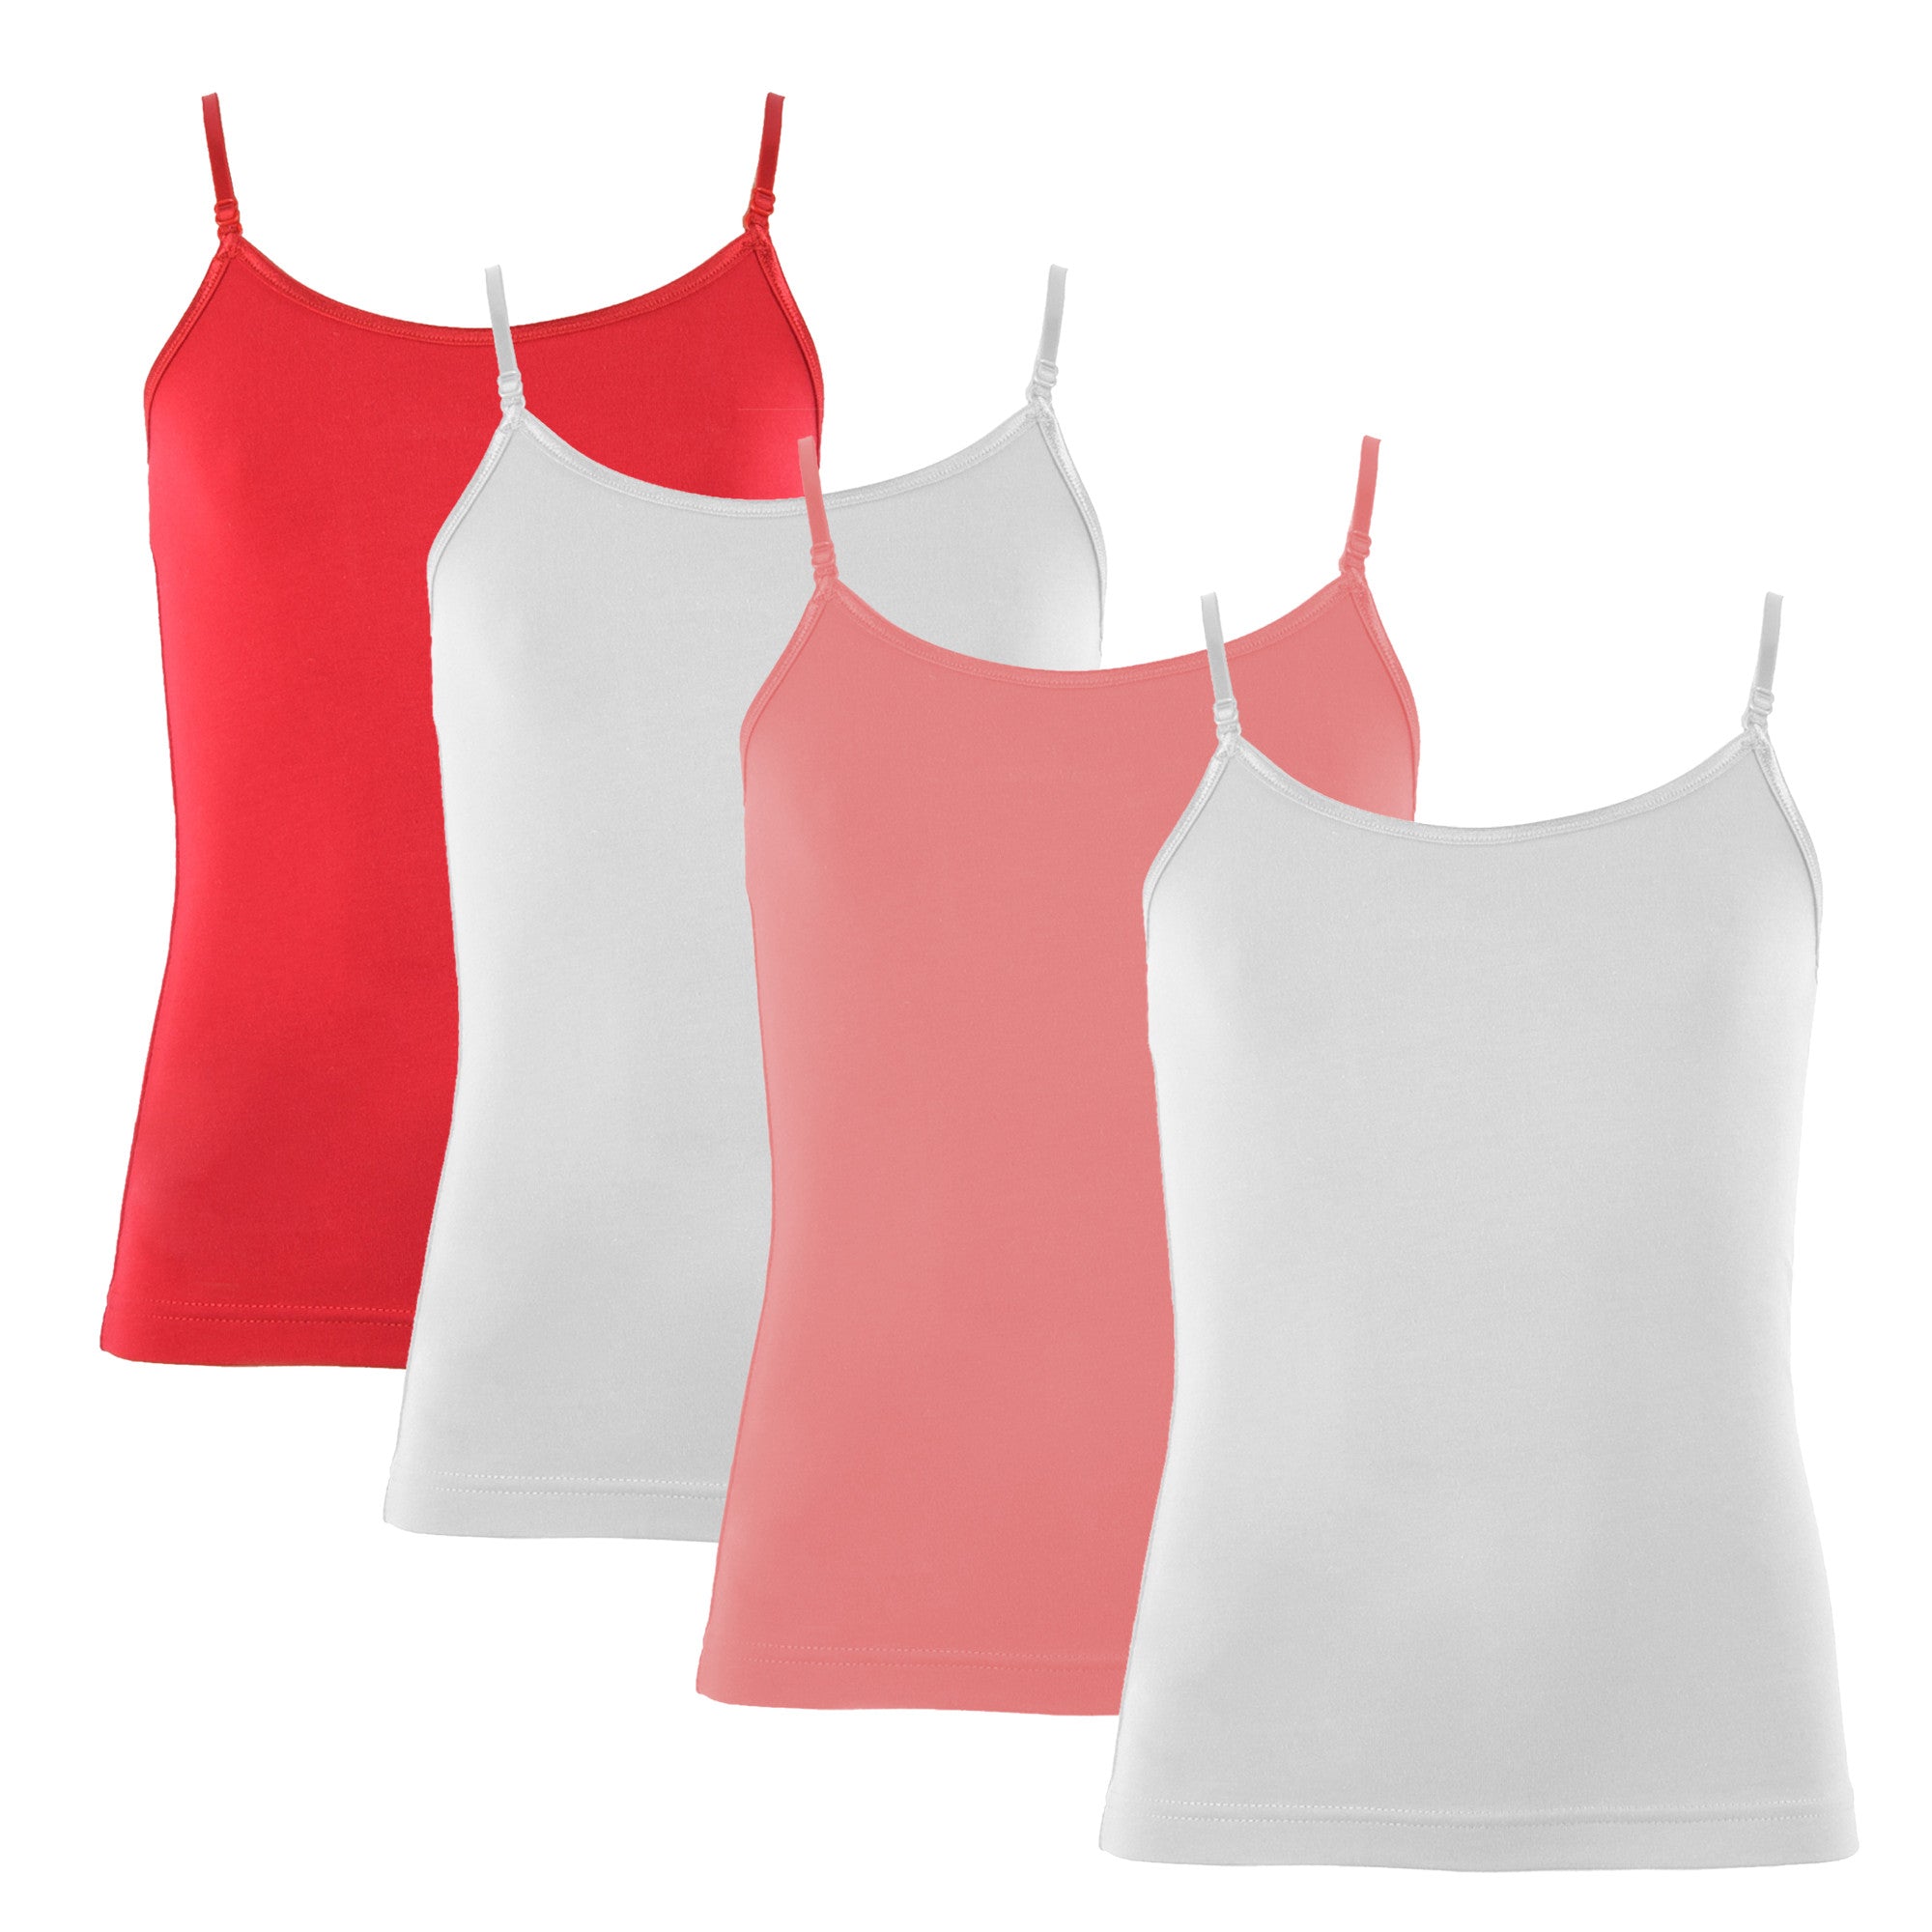 4 Pack White, Pink, Red